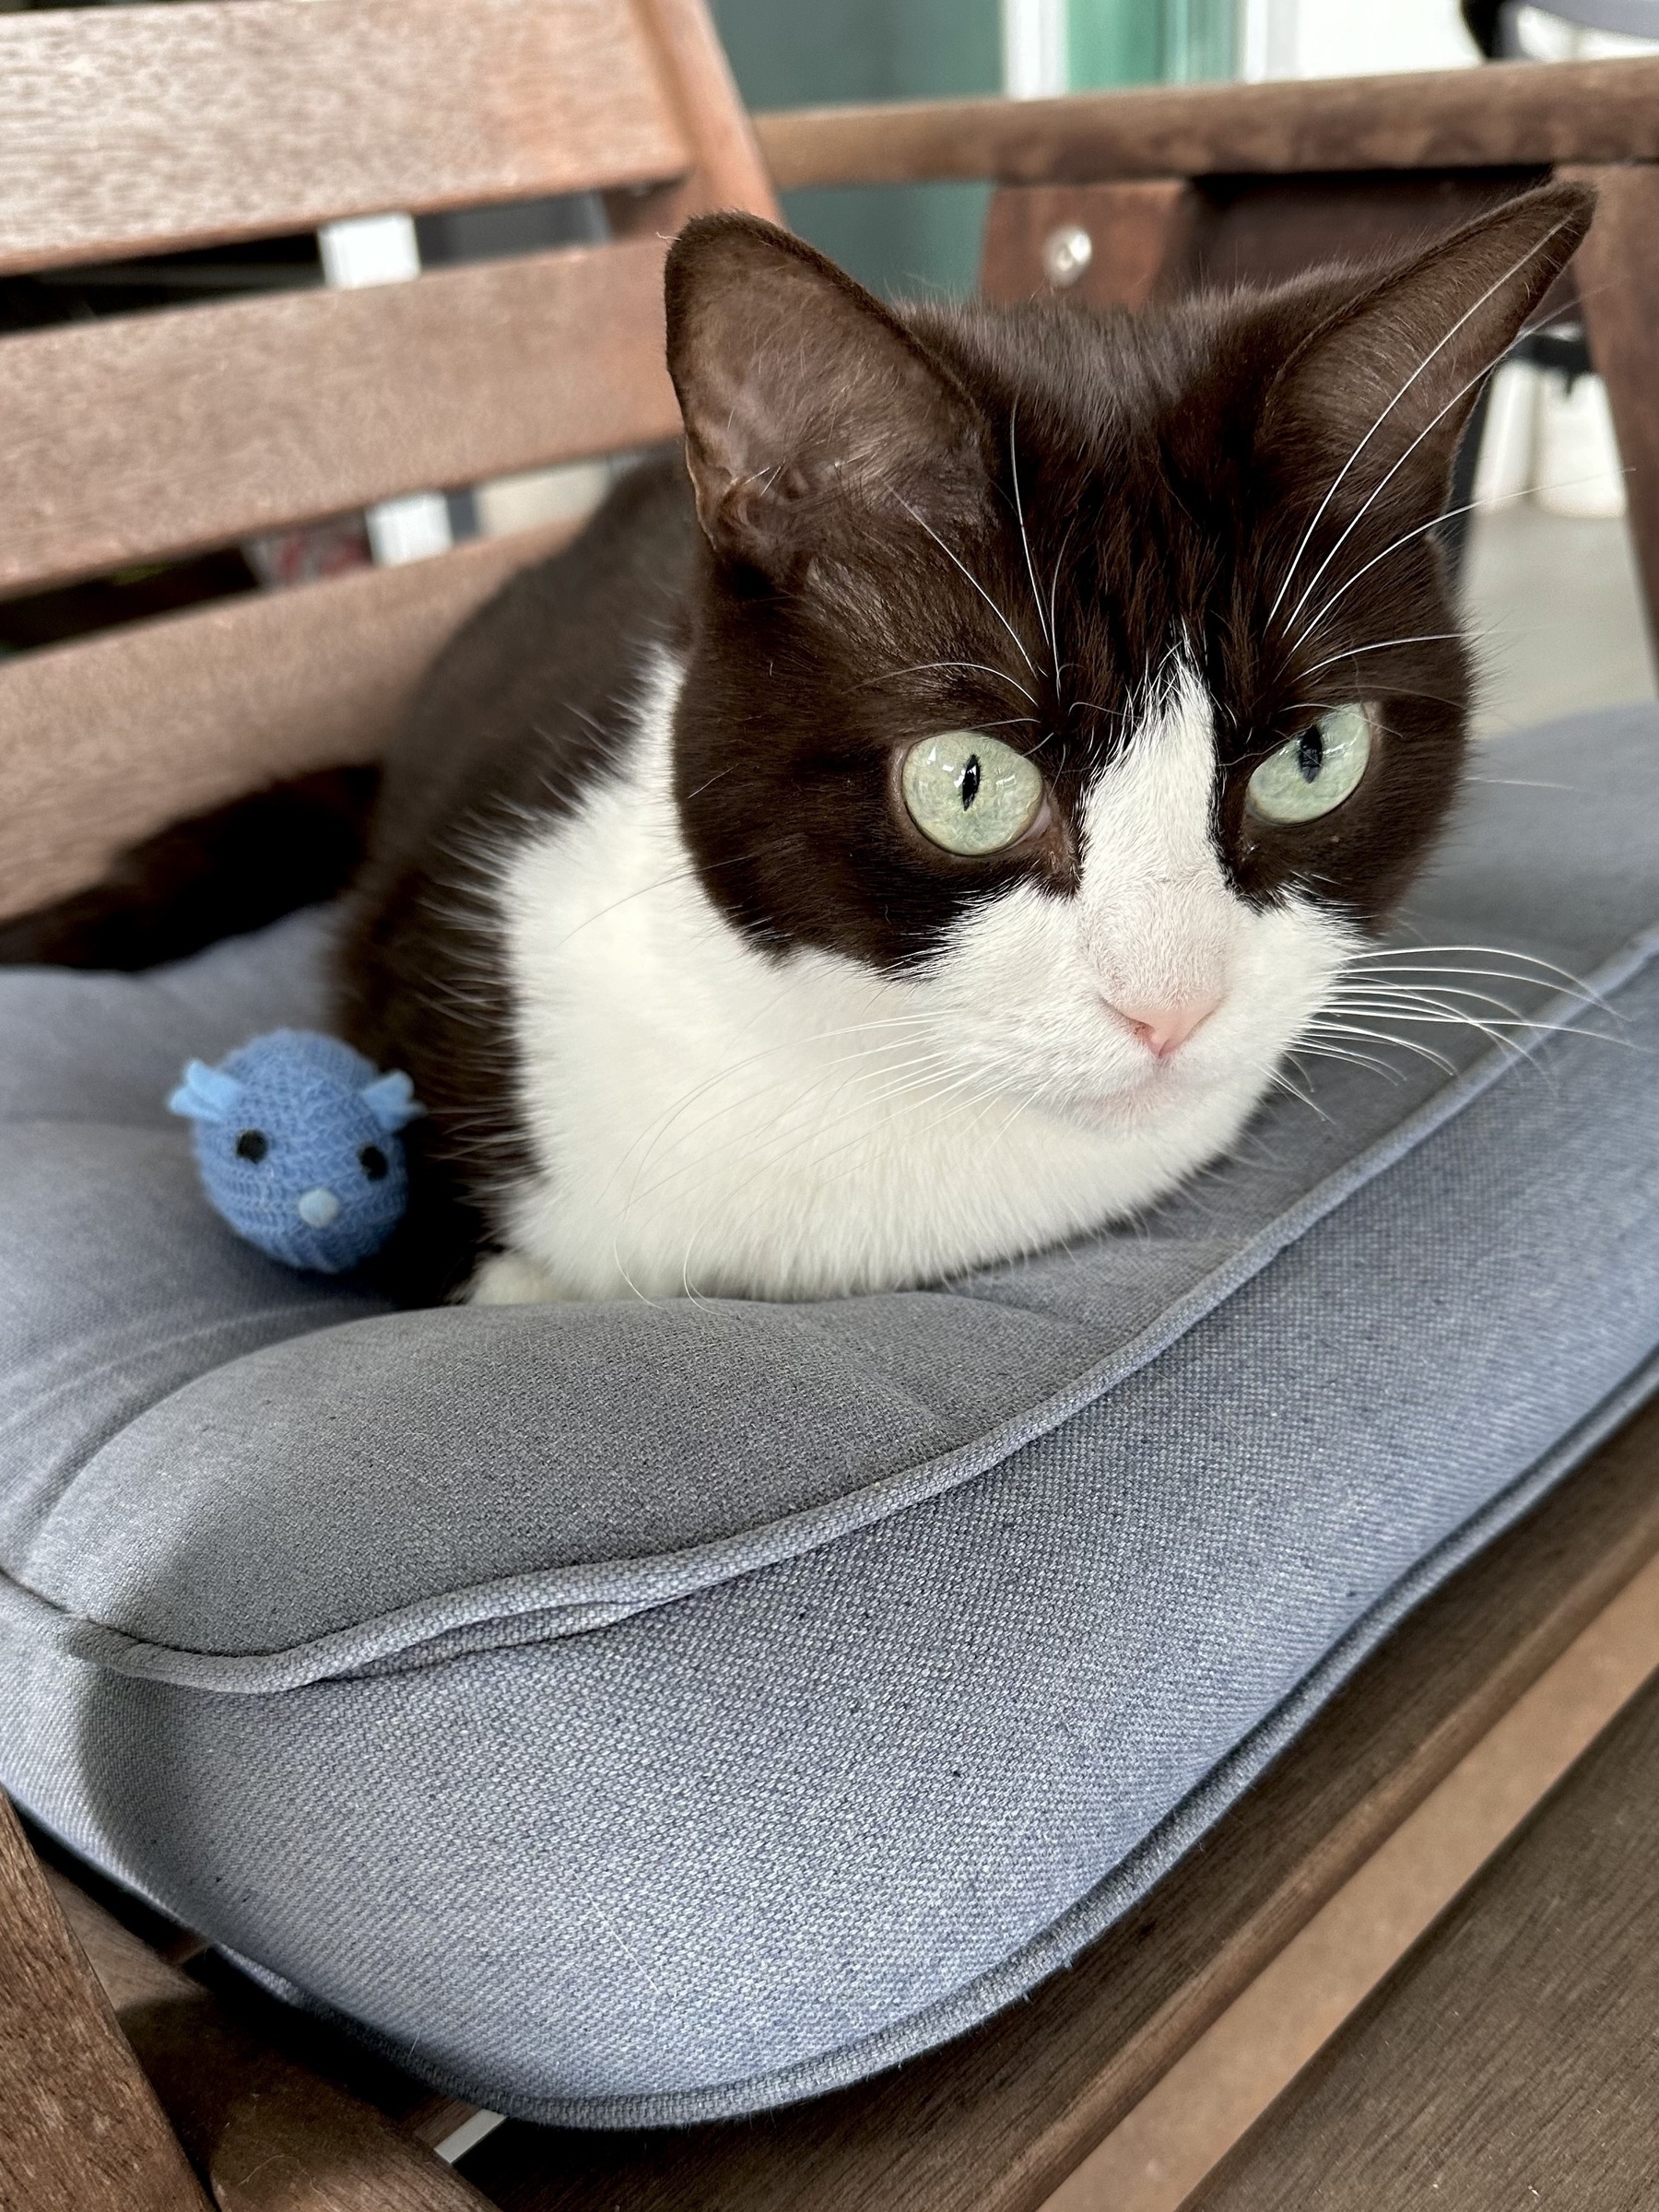 A black and white cat laying on a square faded blue cushion on a wooden chair. A little blue toy mouse is beside her.